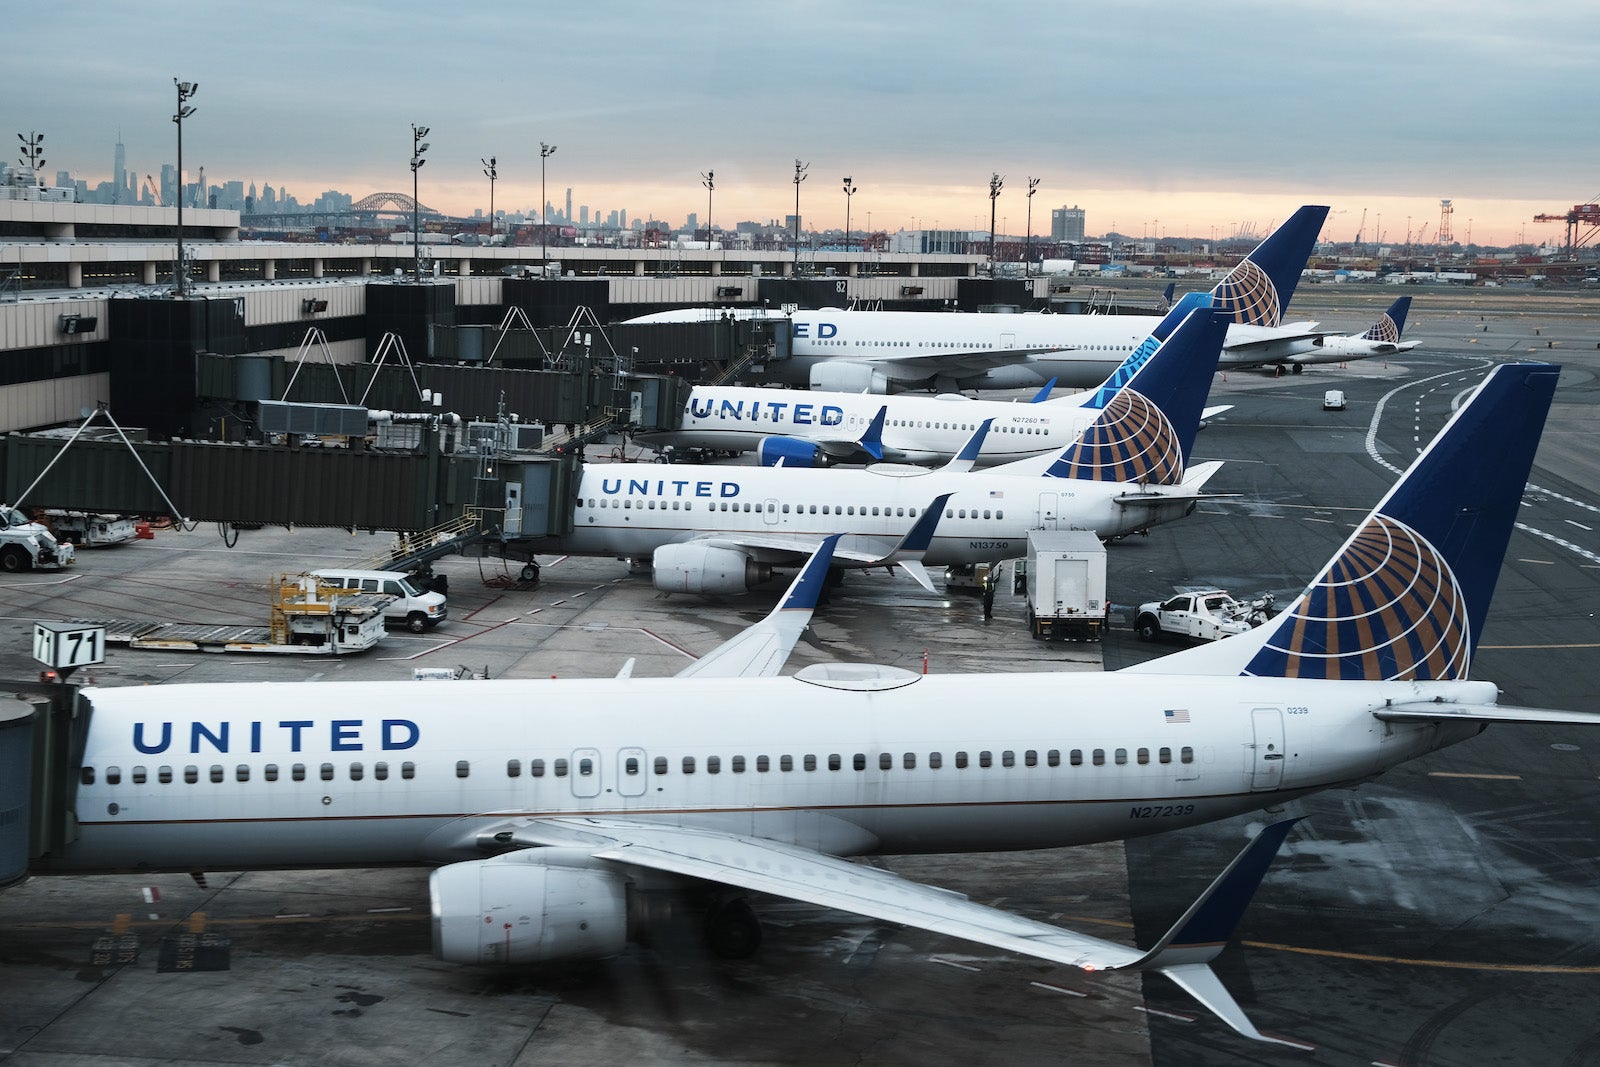 United planes at the gate in Newark